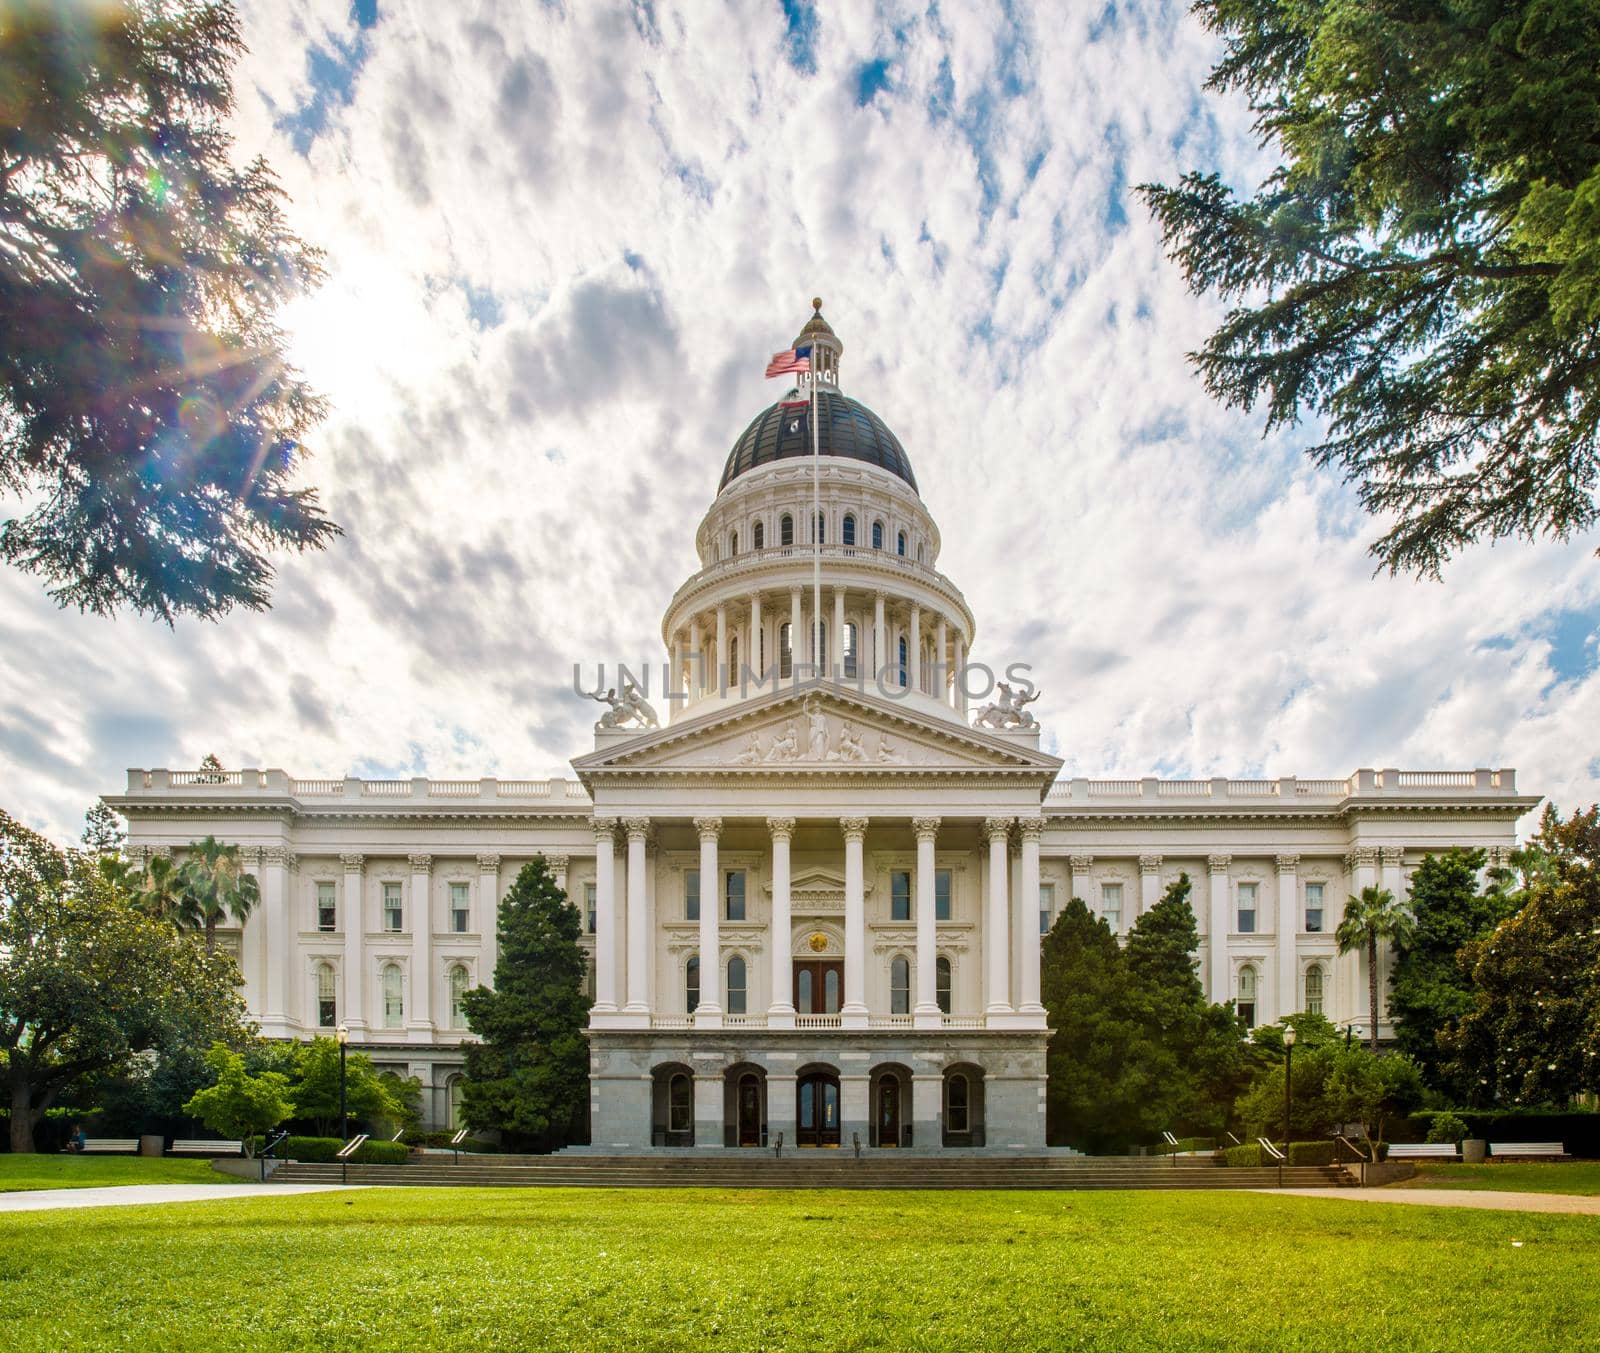 California State Capitol Building by gepeng